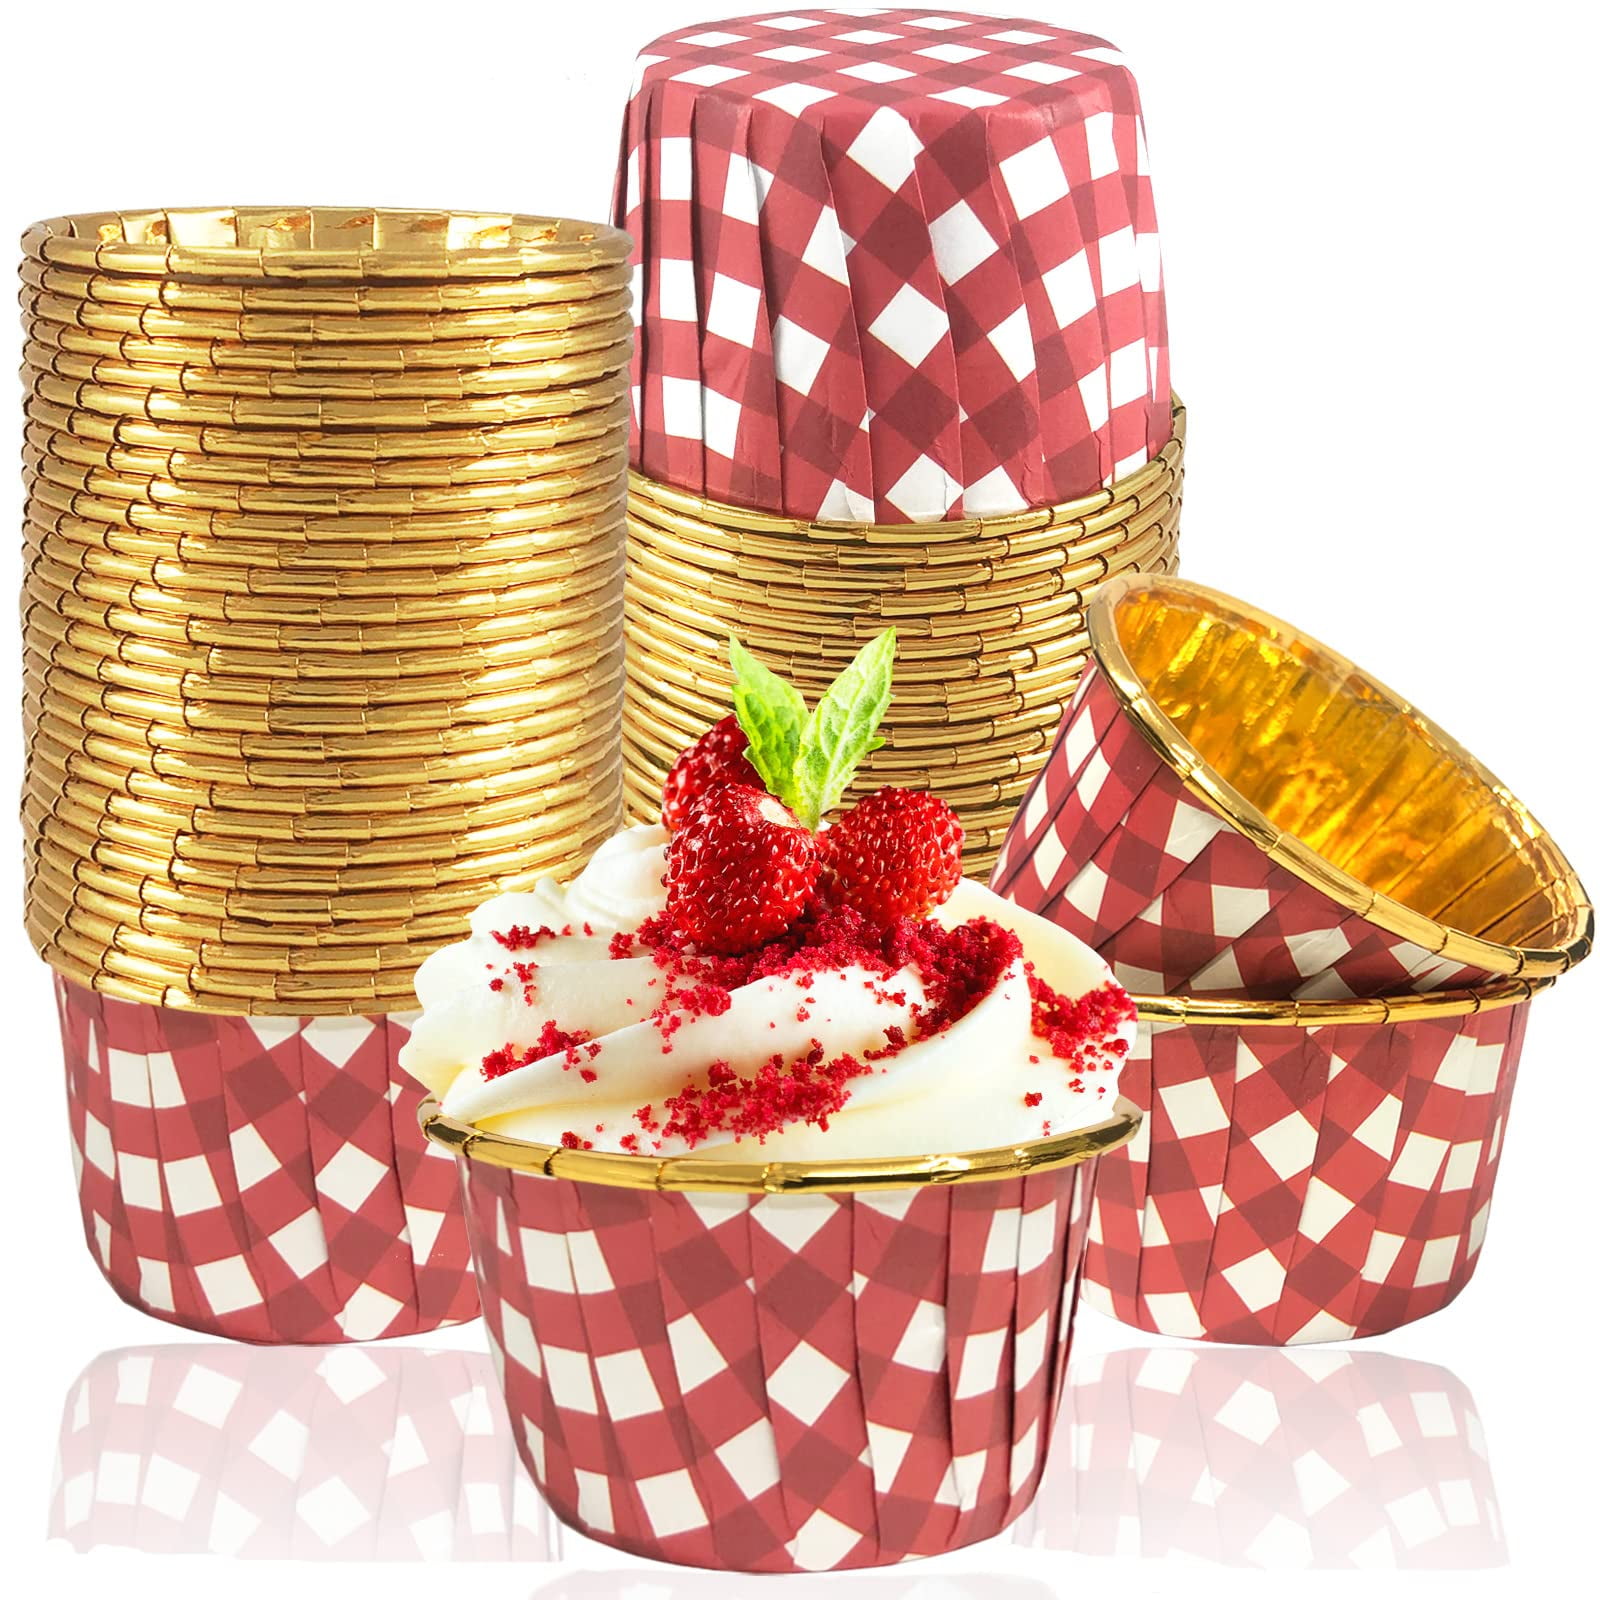 50x Mini Cupcake Muffin Liners Wrappers Paper Baking Cups for Birthday,  Wedding, PACK - Kroger